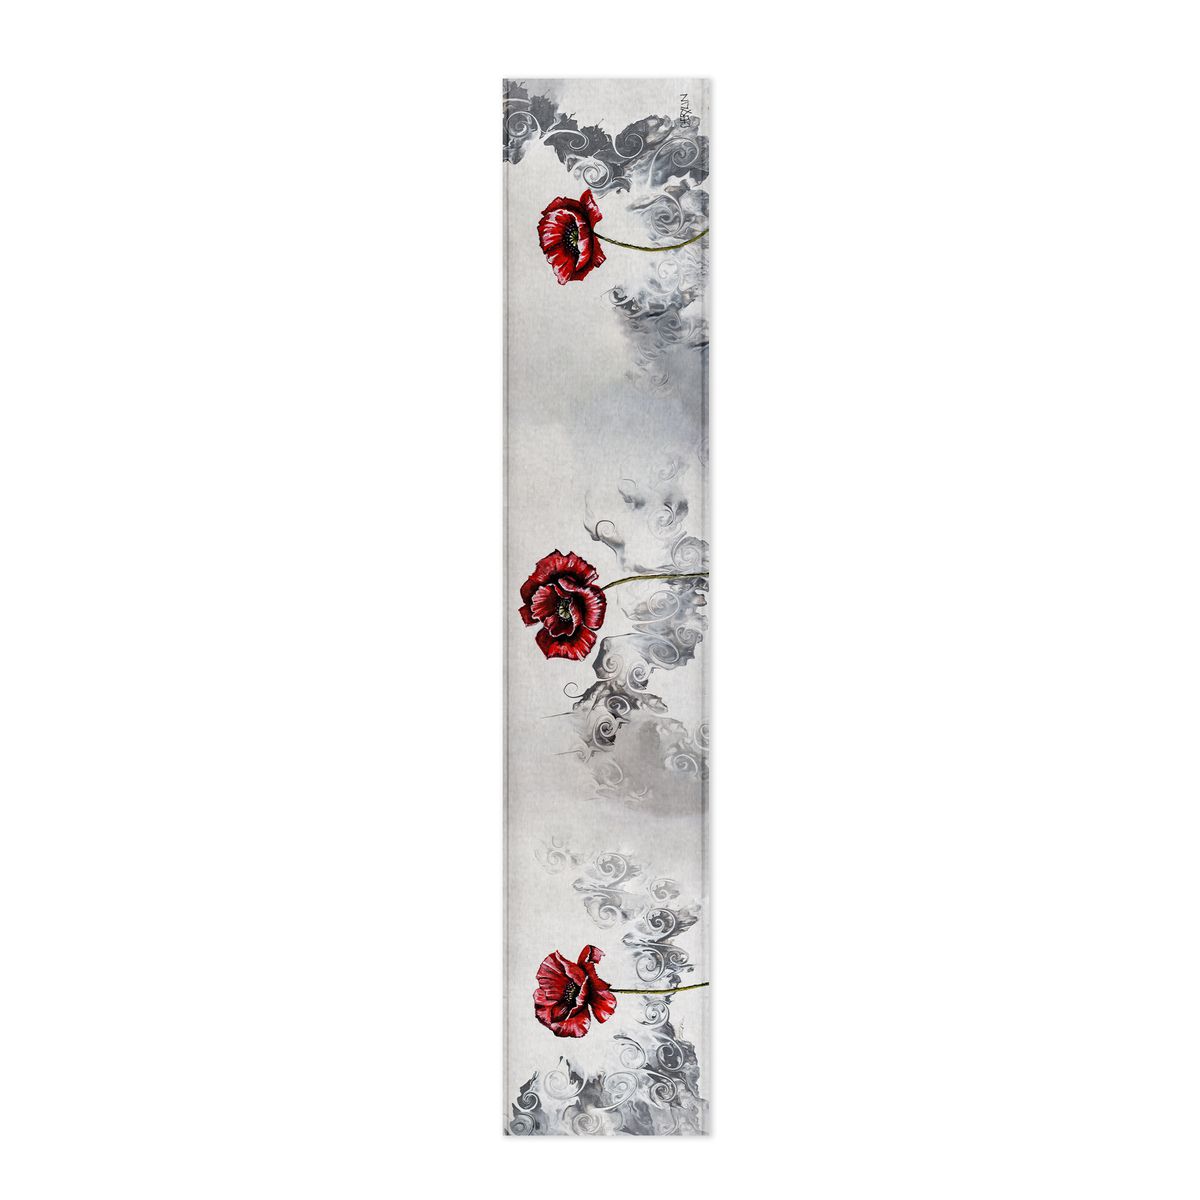 Red Poppies On Ink Pour By Cherylin Louw Table Runner